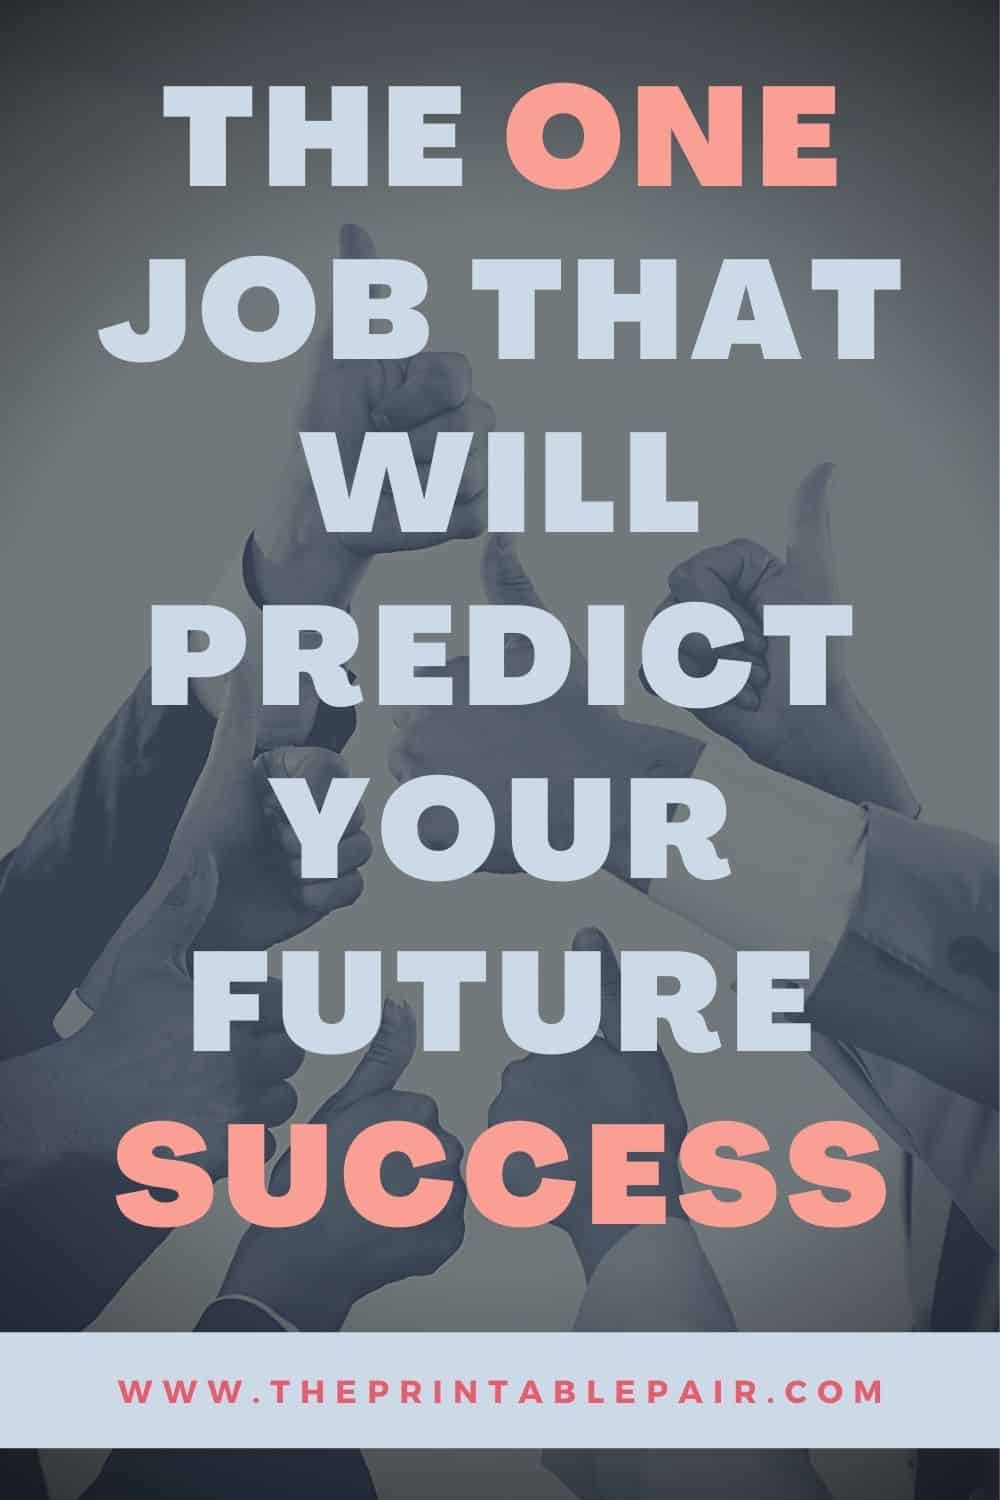 The One Job That Will Predict Your Future Success